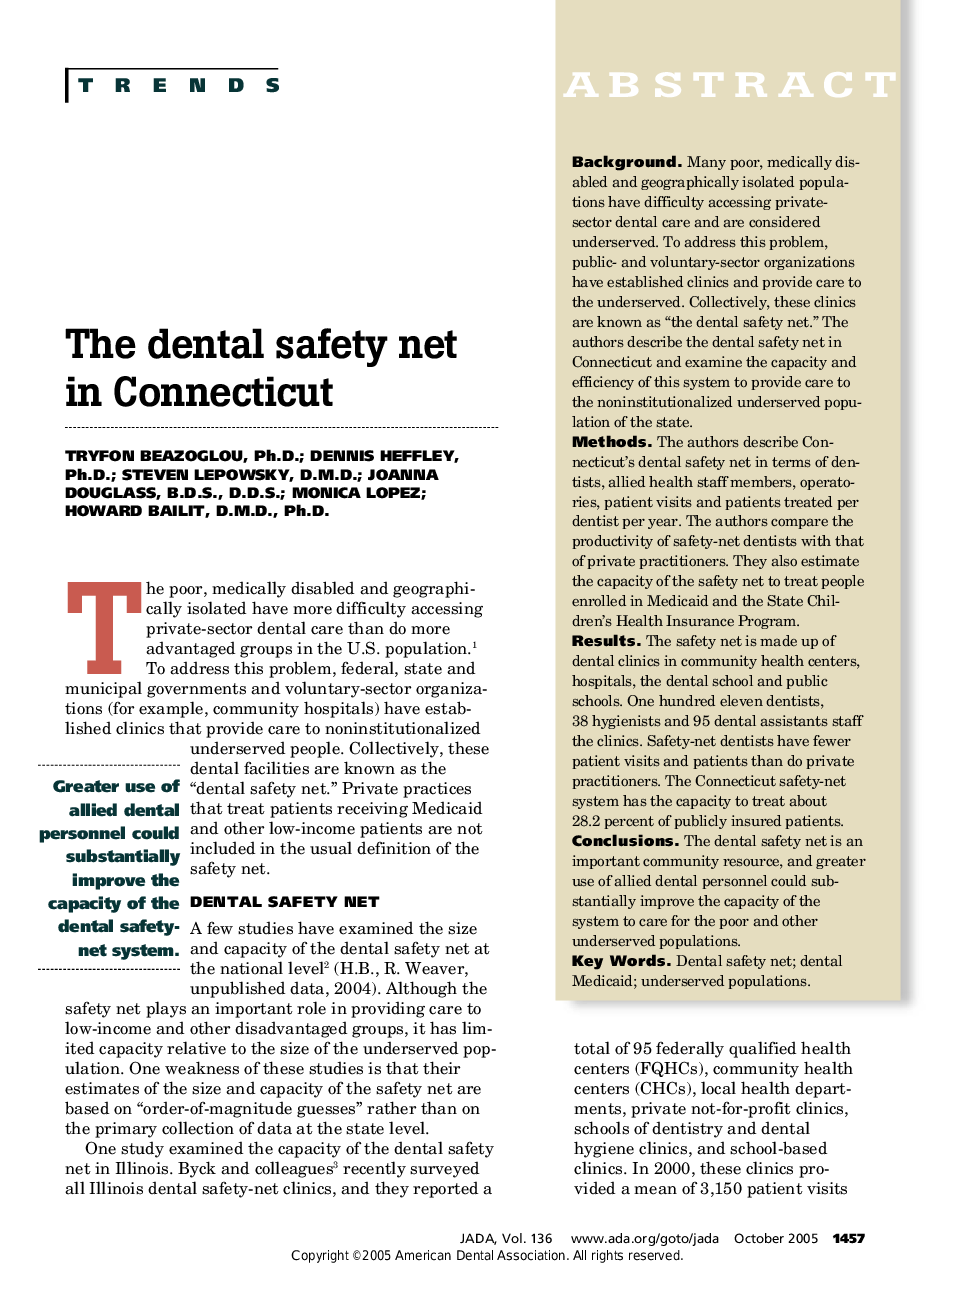 The dental safety net in Connecticut